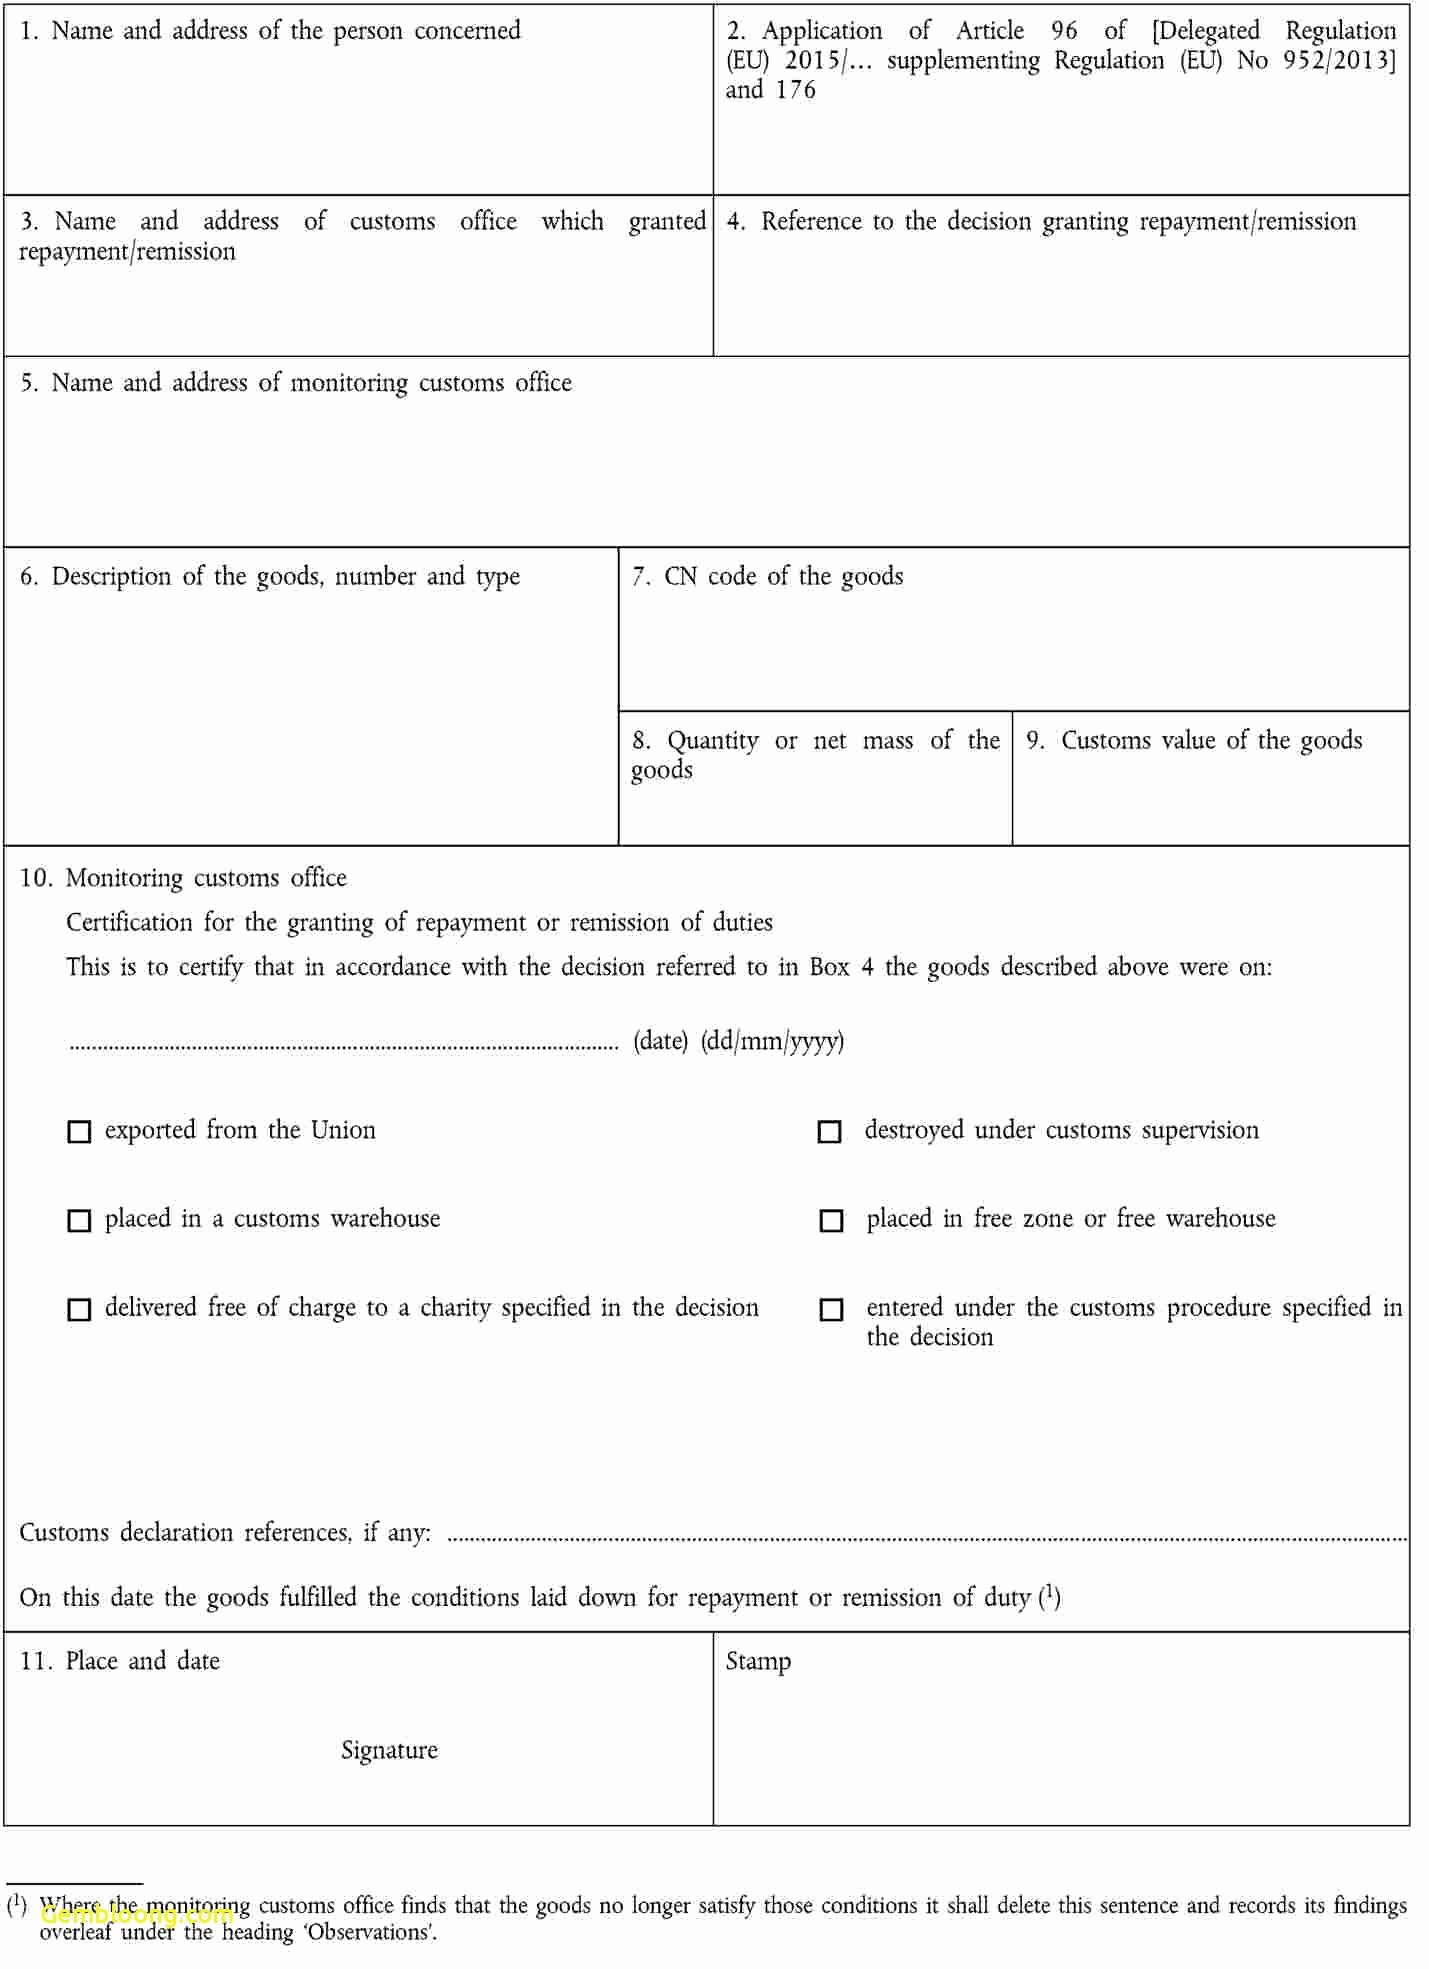 Balancing Act Worksheet Answers Best Of Balancing Act Worksheet Answers Cramerforcongress